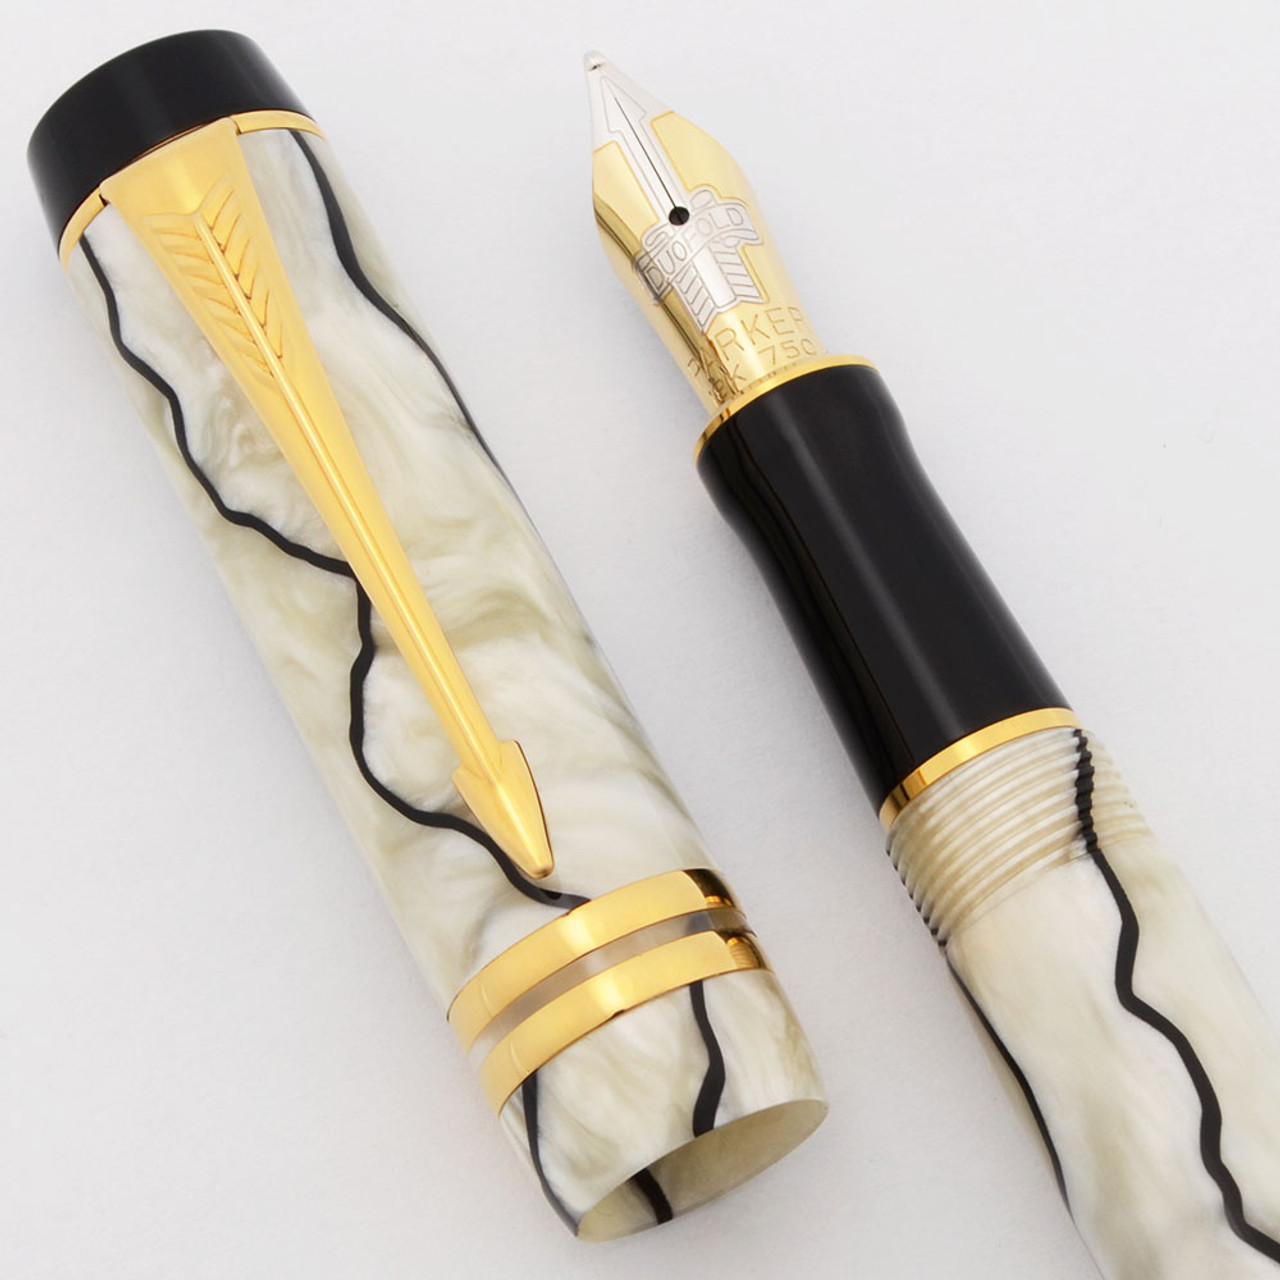 Parker Duofold International Fountain Pen - Mk II, Pearl and Black 